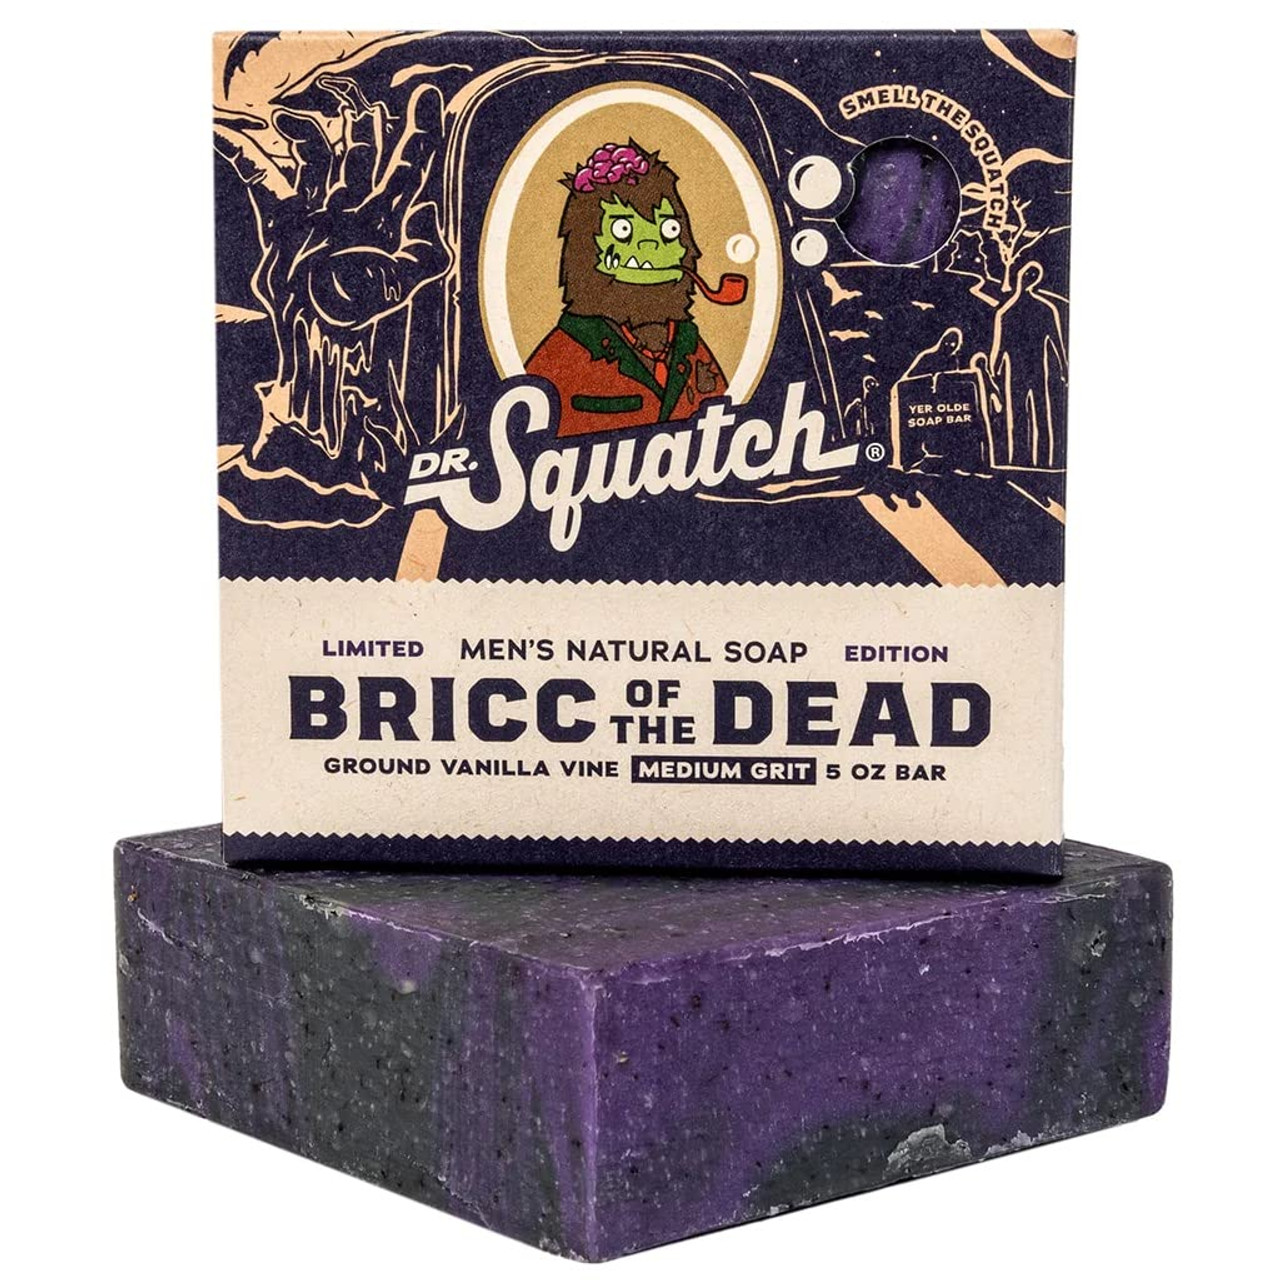  Dr. Squatch Limited Edition All Natural Bar Soap for Men with  Medium Grit, Mars Bar : Beauty & Personal Care